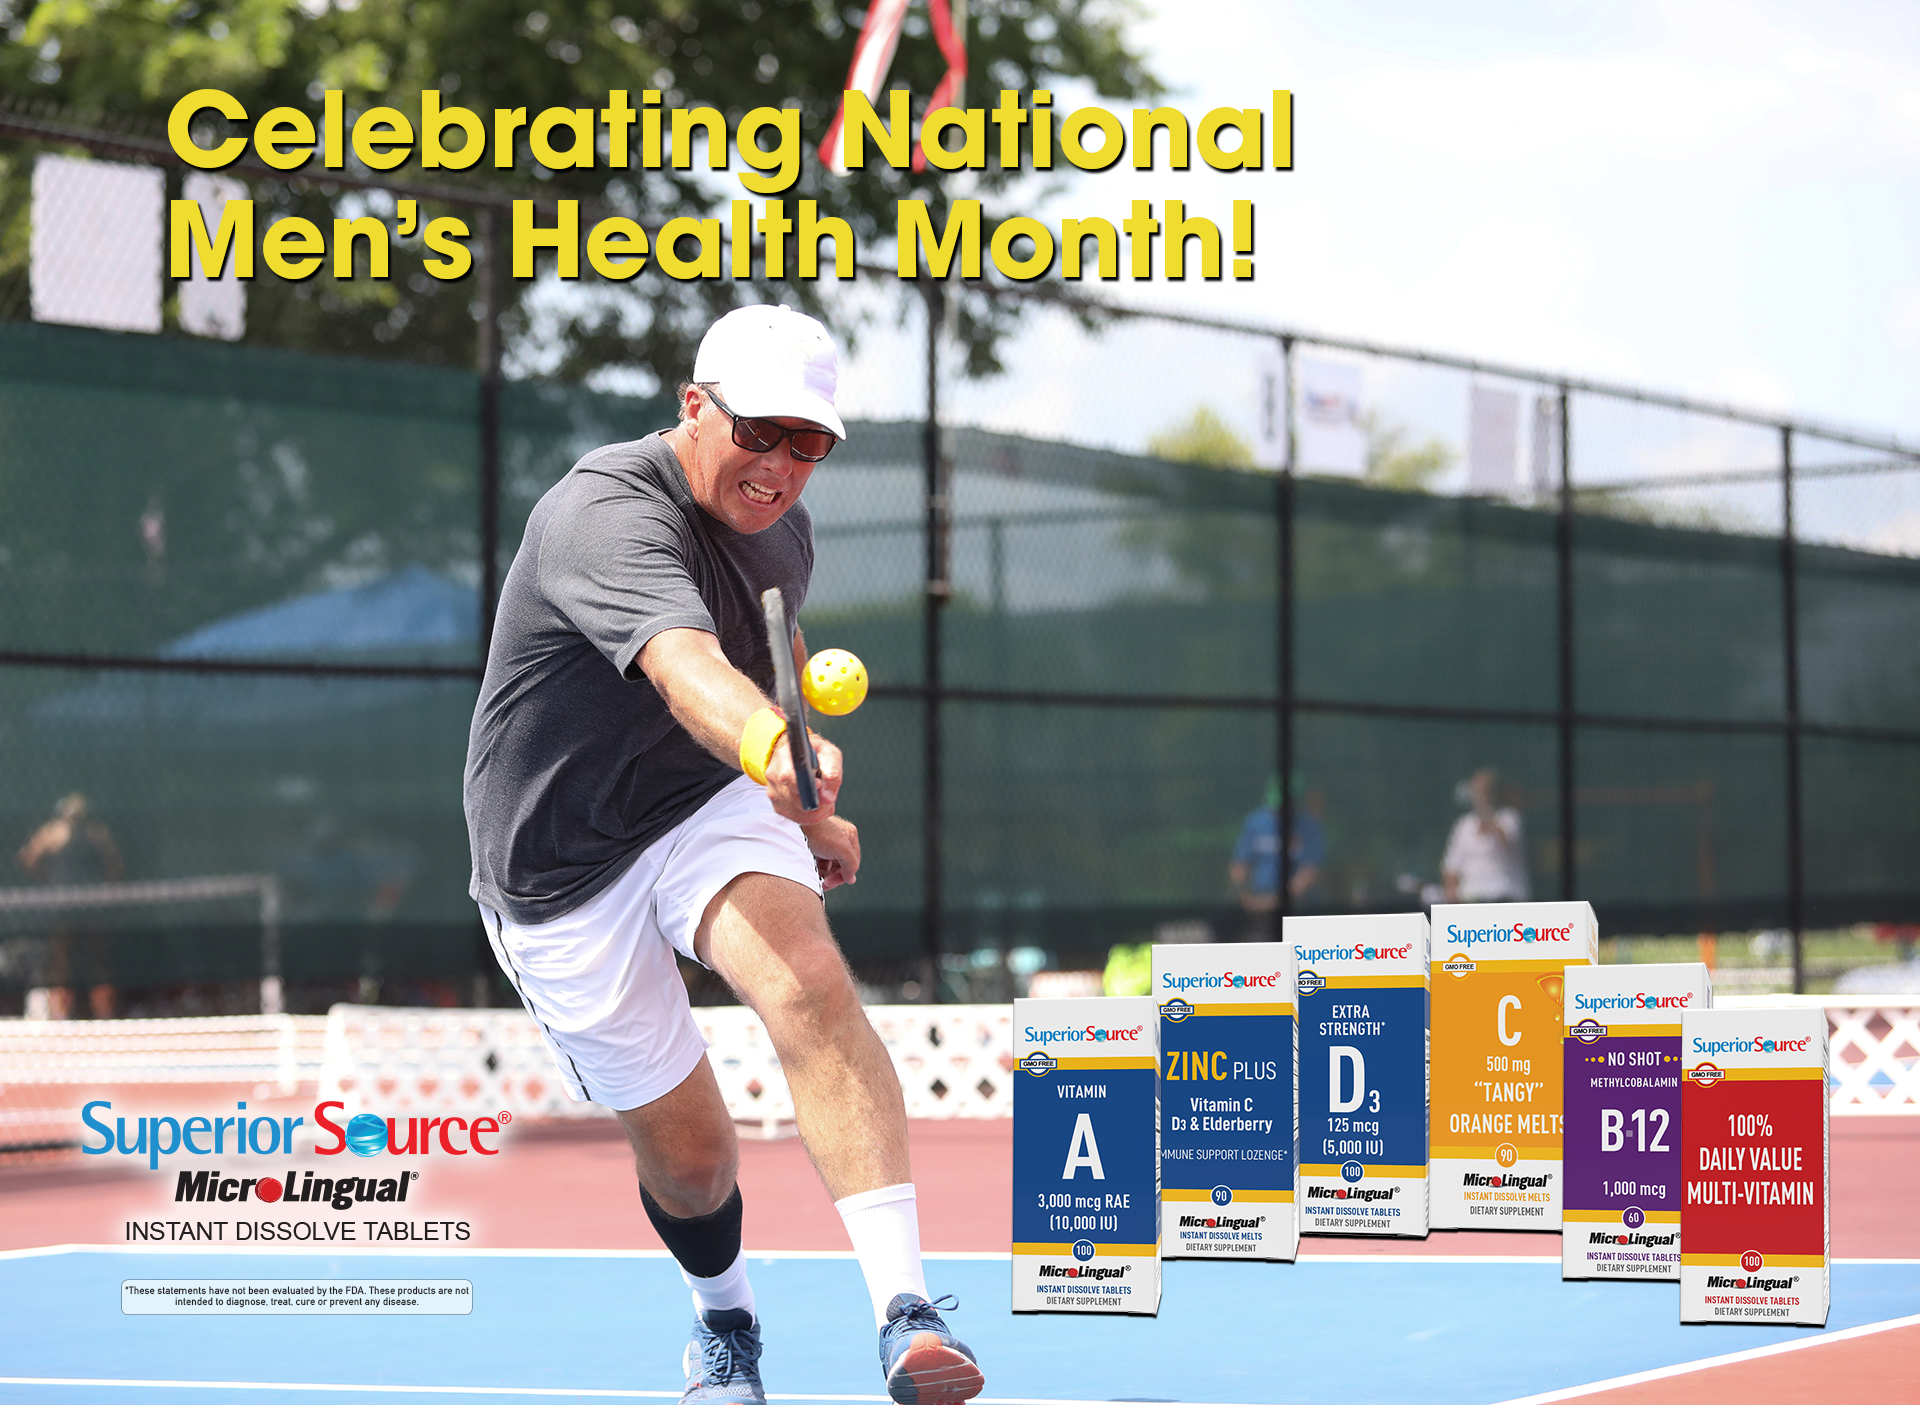 Superior Source Vitamins giveaway for men's health celebration featuring man playing tennis